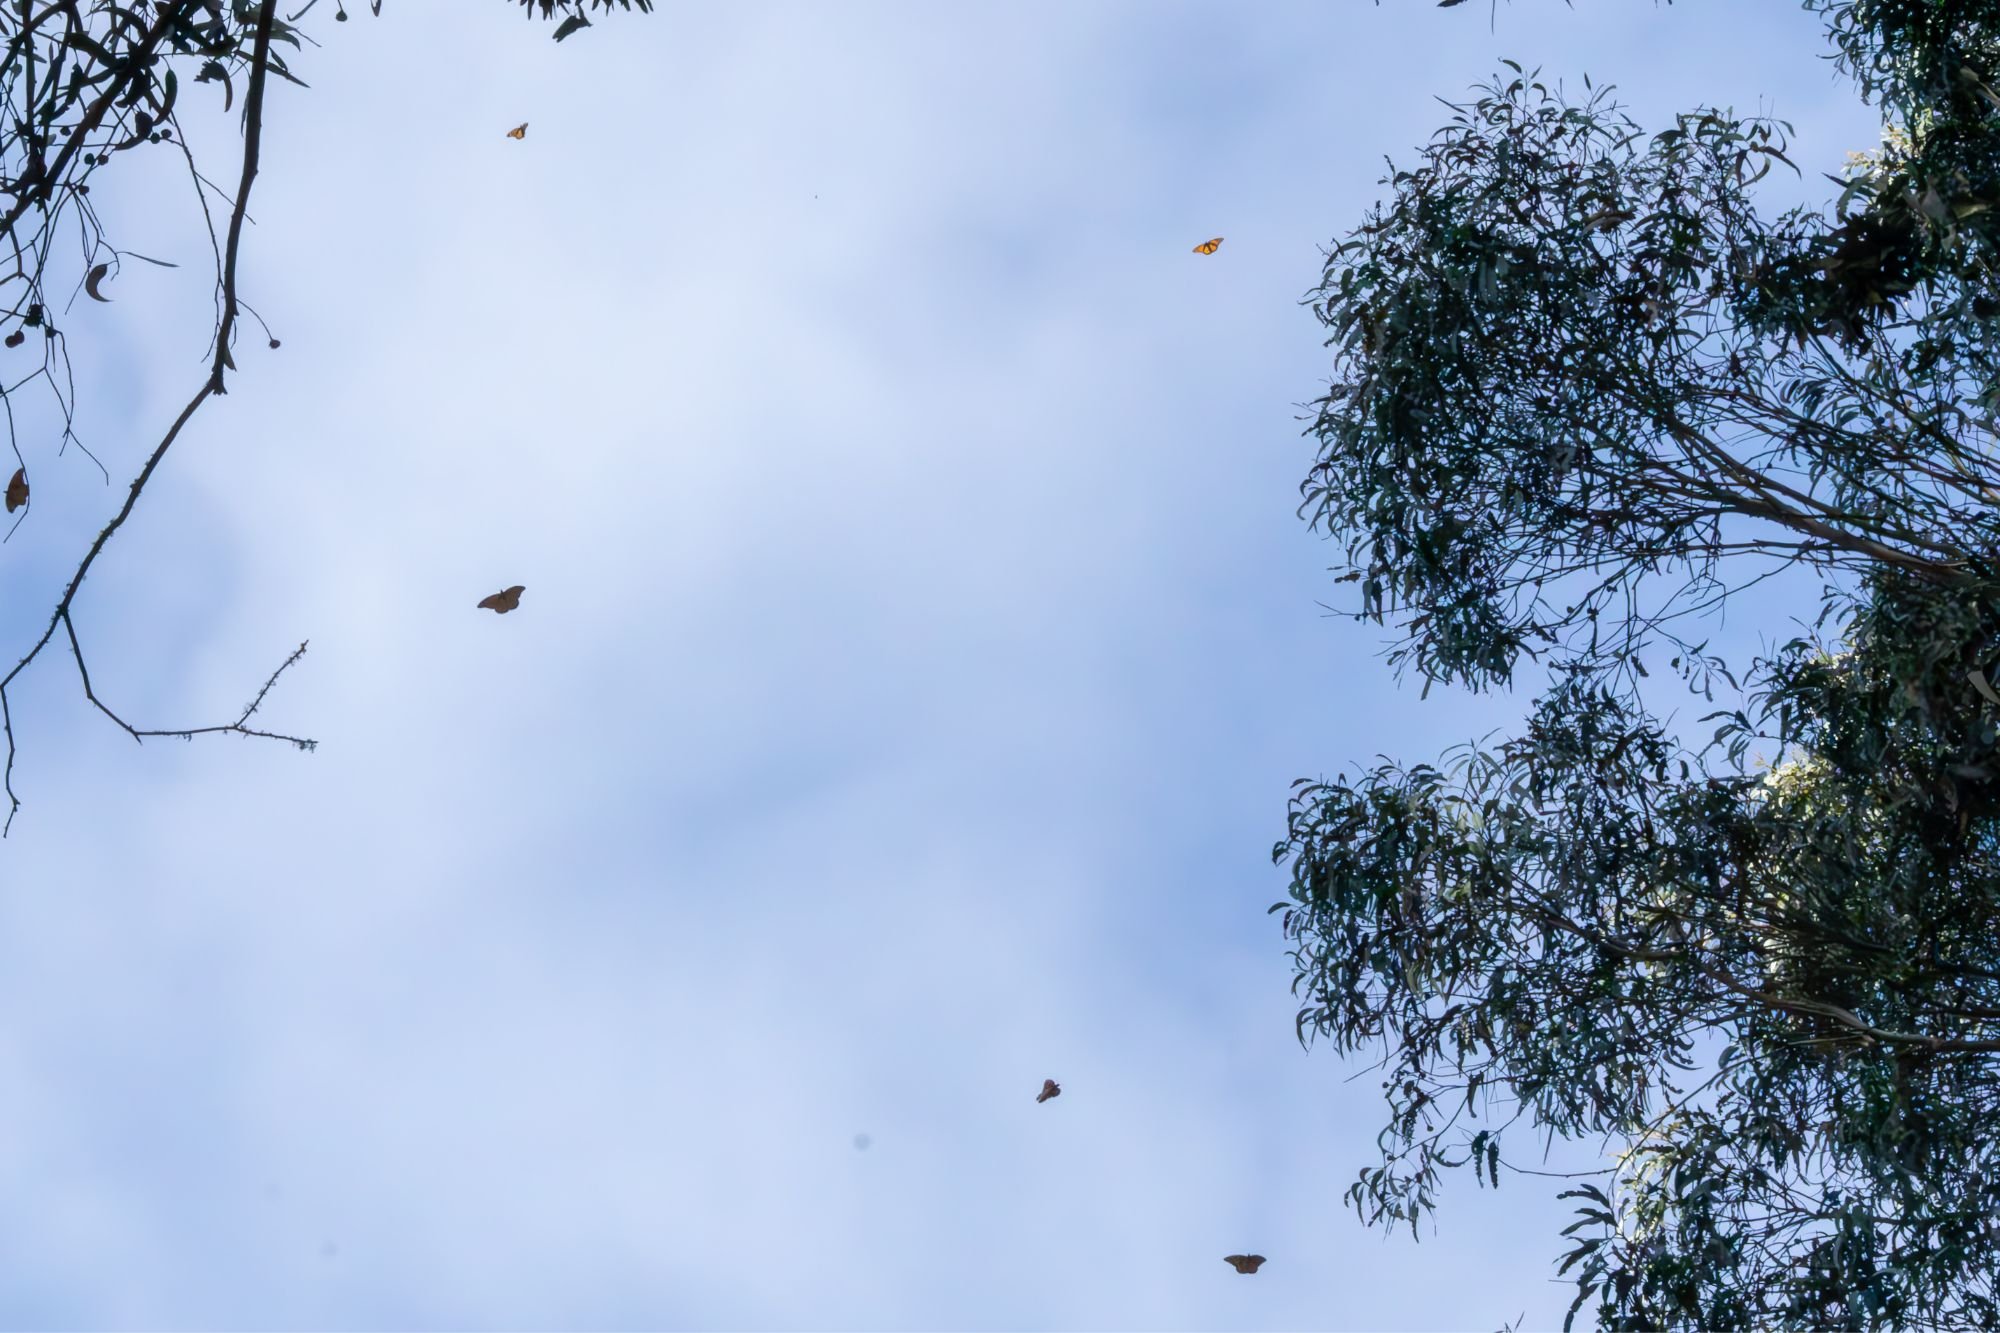 A view up in to the sky with monarch butterflies flying and tree branches off to the side.